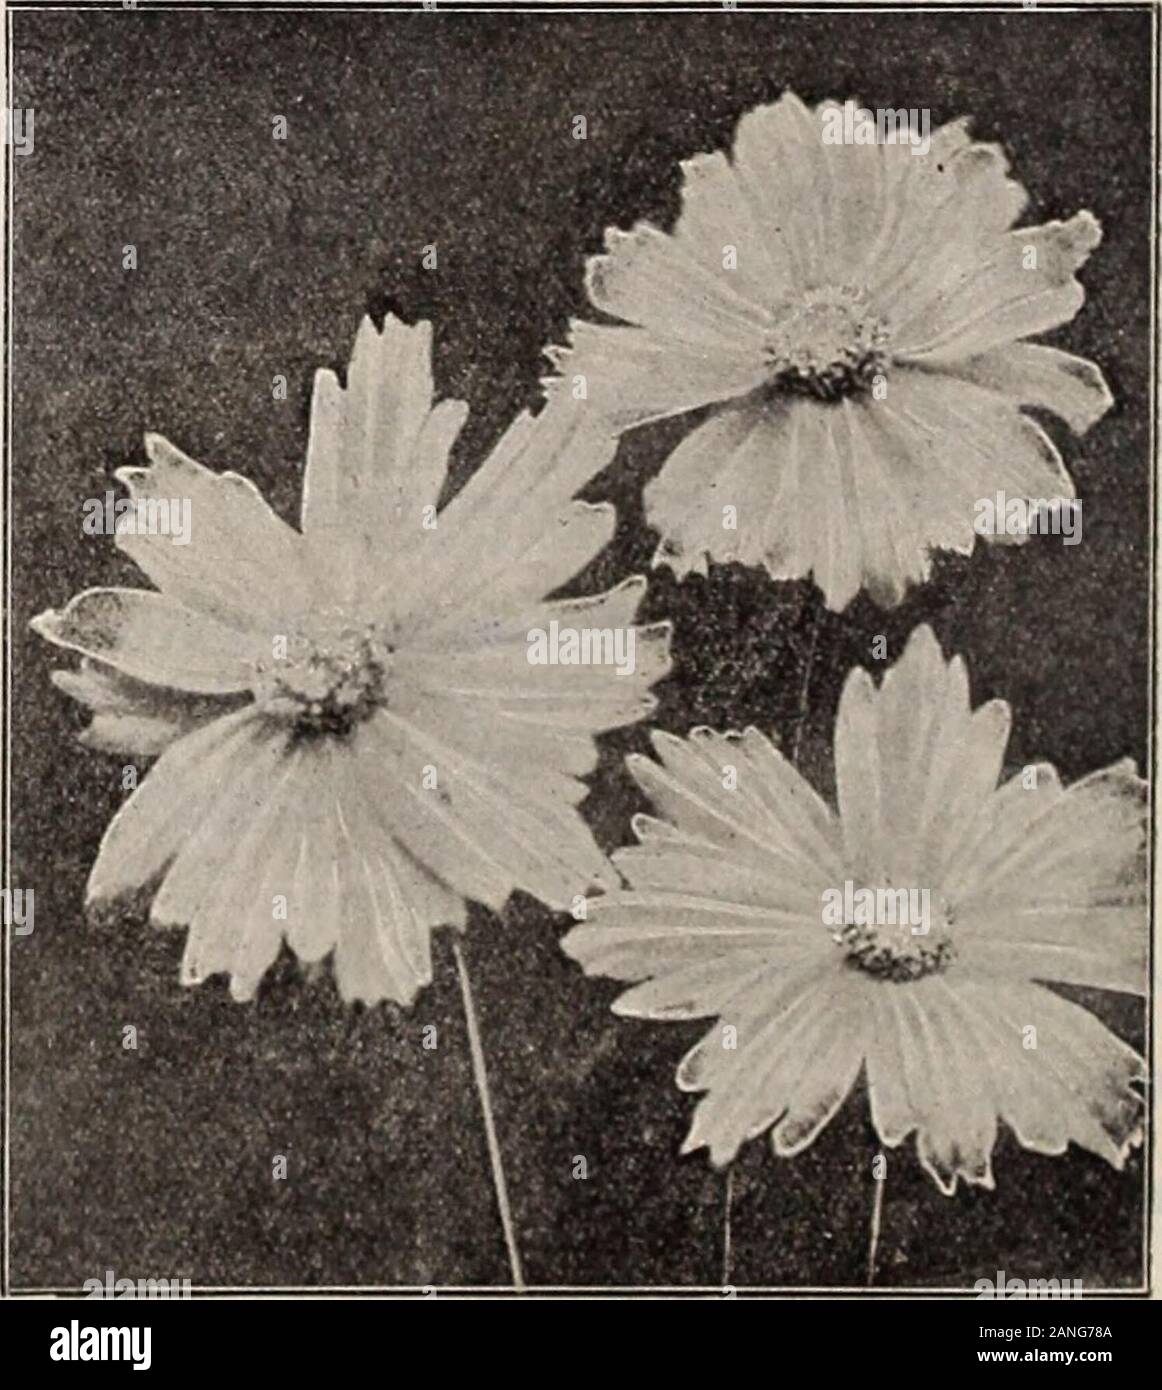 Dreer's 72nd annual edition garden book : 1910 . er doz.; $20.00 per 100. COREOPSIS. Lanceolata grandiflora. One of the mostpopular hardy plants. The flowers are a richgolden-yellow, of graceful form and invaluable for cutting;the main crop comes during the latter part of June, but itcontinues in bloom the entire summer and autumn; it succeedseverywhere.Rosea. Finely-divided, dark green foliage, bearing in .Augustand September numerous small pink flowers; useful in borderor rockery; 1 foot.Verticillata. Masses of small golden-yellow flowers in Julyand August, on neat plants with finely-divided Stock Photo